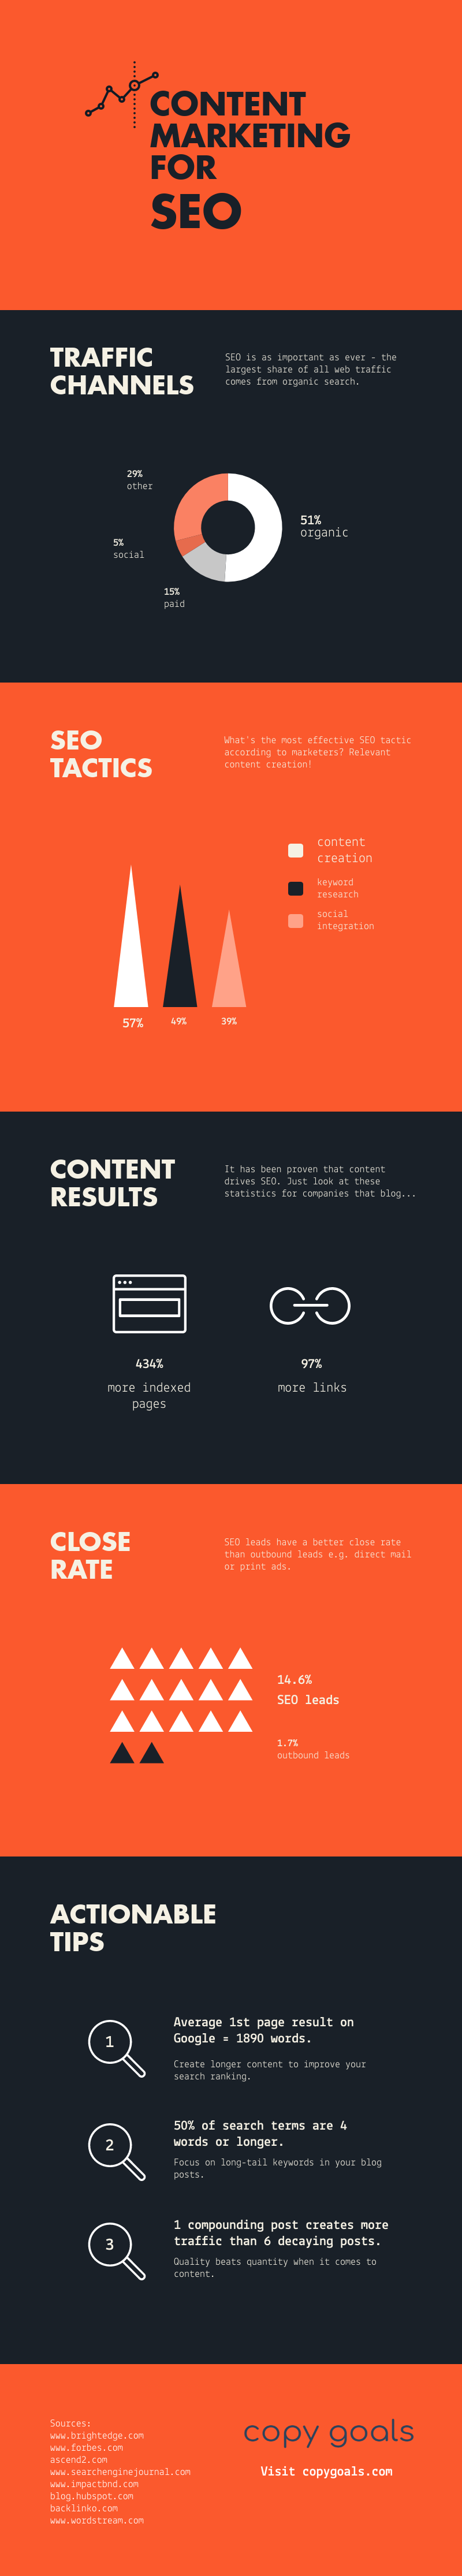 Content Marketing for SEO - #infographic